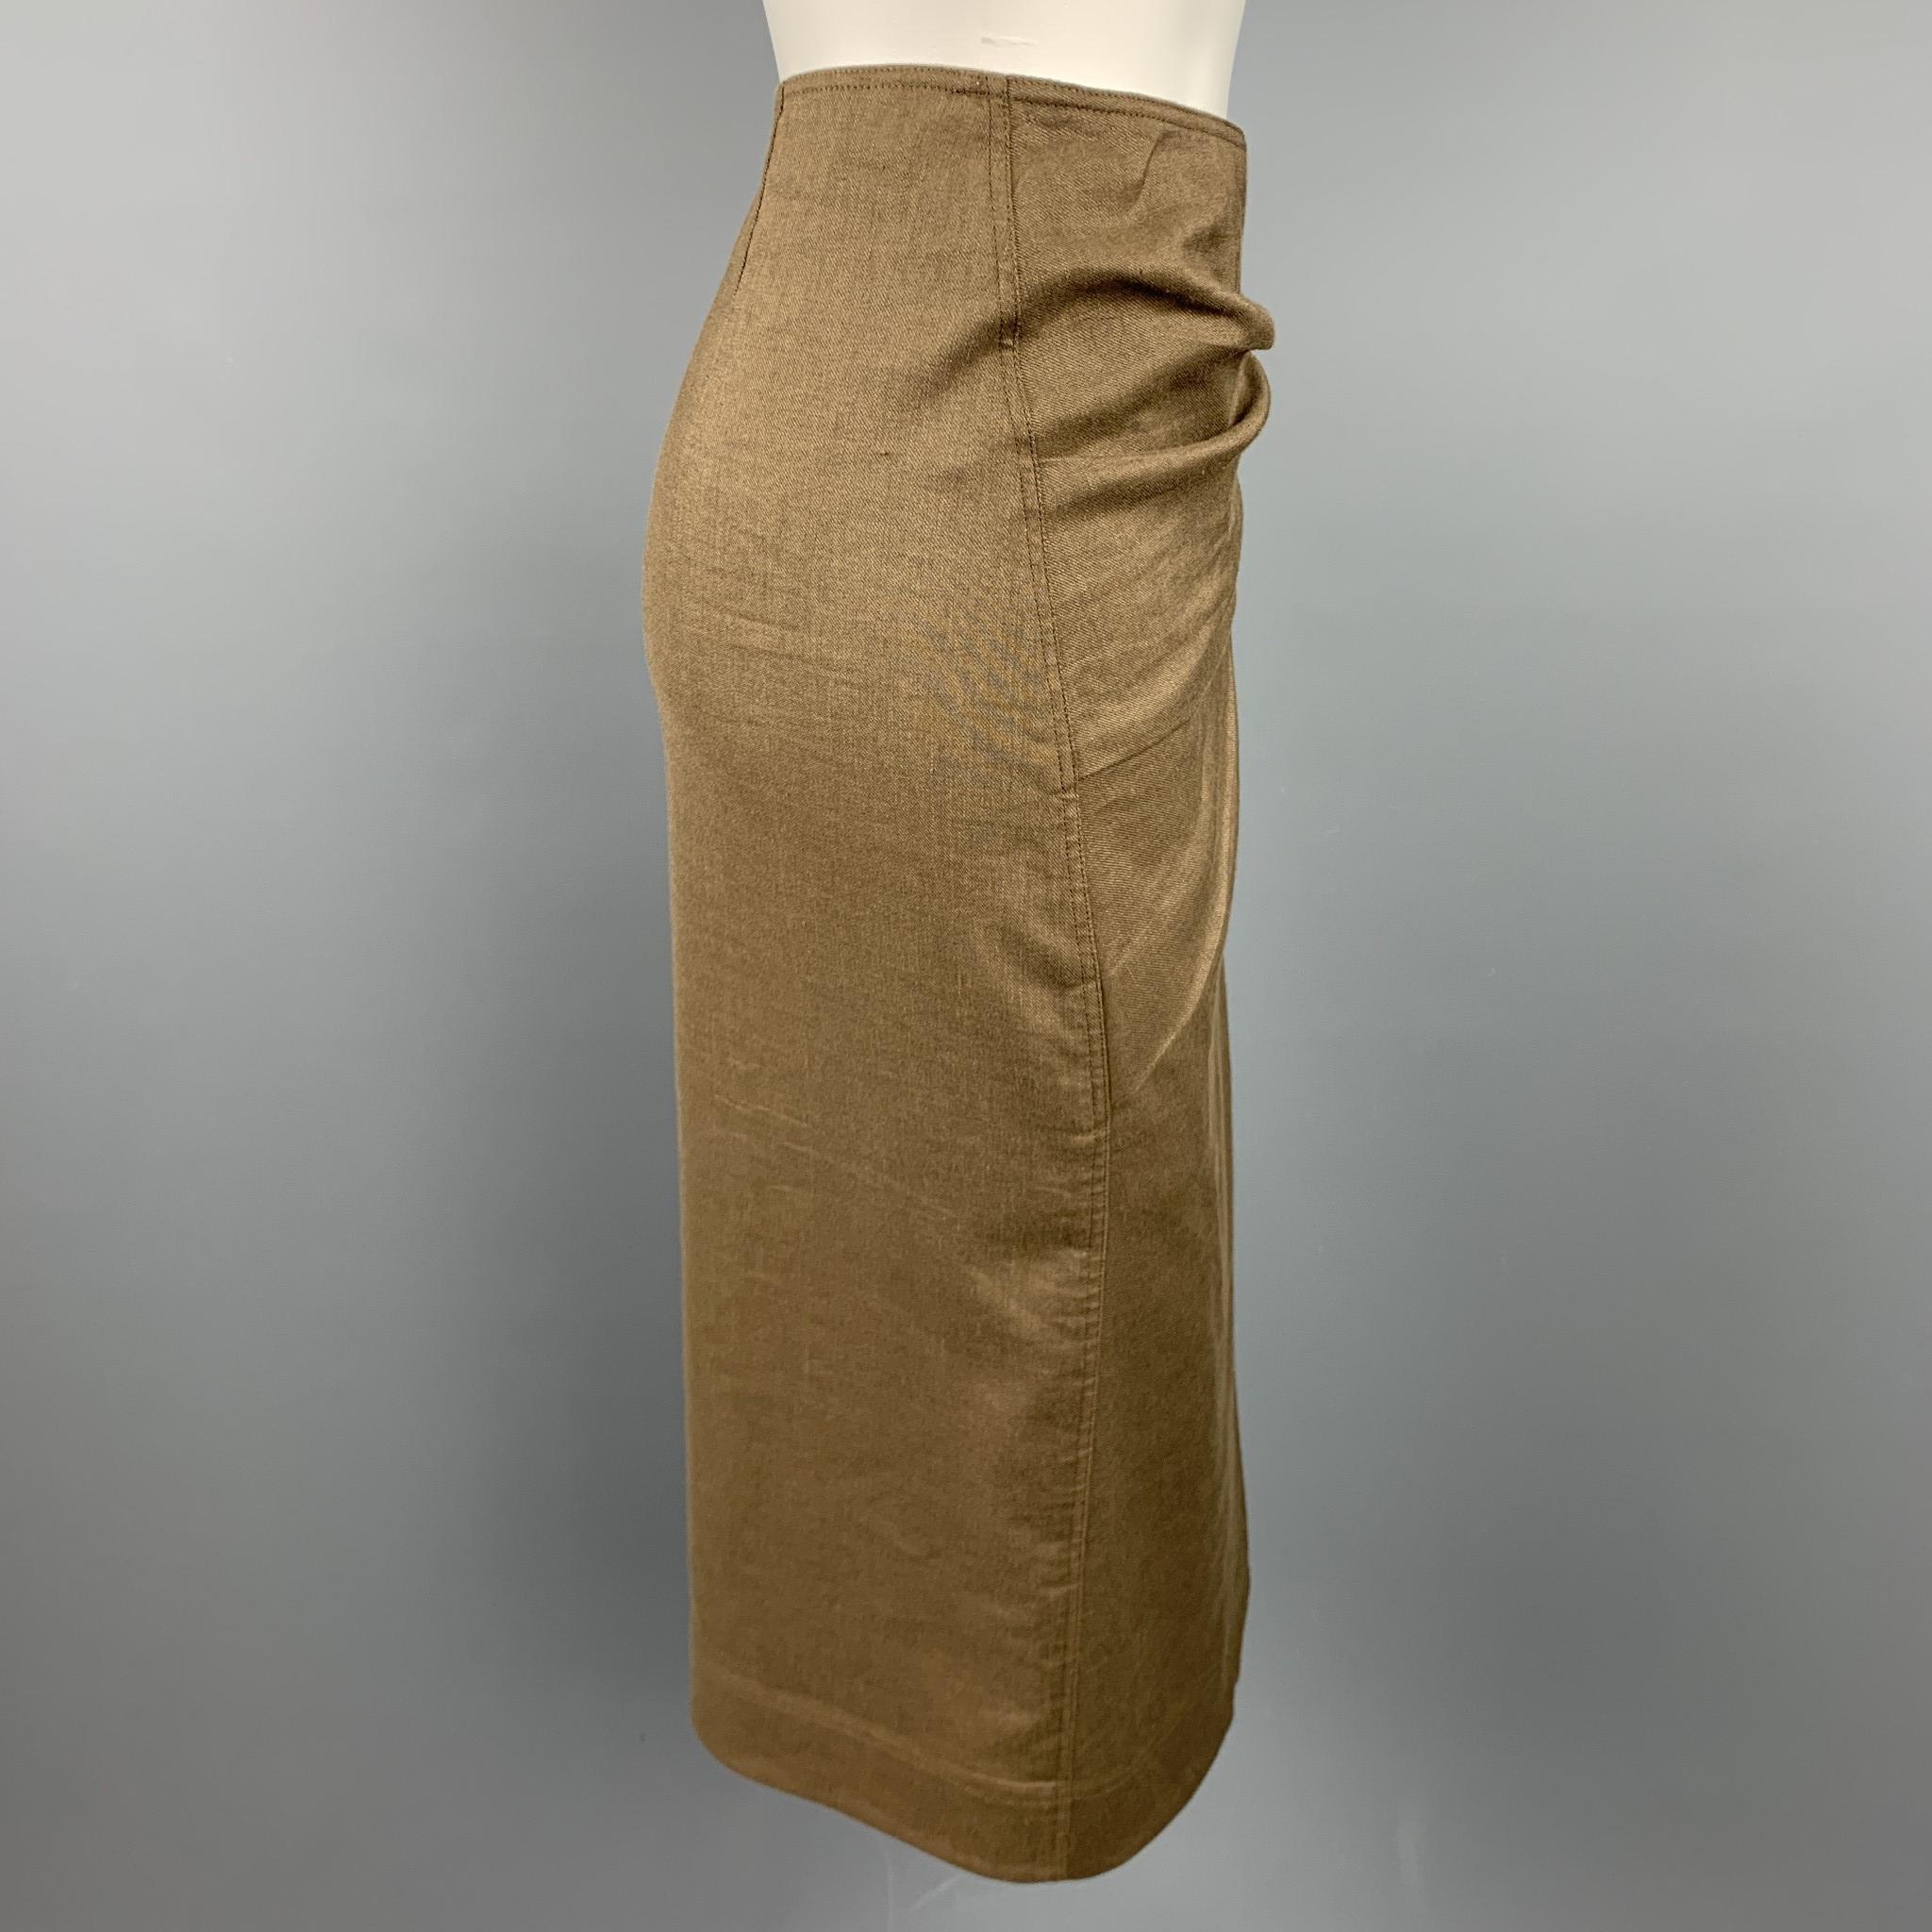 DONNA KARAN skirt comes in a olive twill wool / linen featuring a draped style, side slit, and a side tab closure. Blazer set sold separately.

Very Good Pre-Owned Condition.
Marked: 4

Measurements:

Waist: 29 in. 
Hip: 32 in. 
Length: 28 in. 